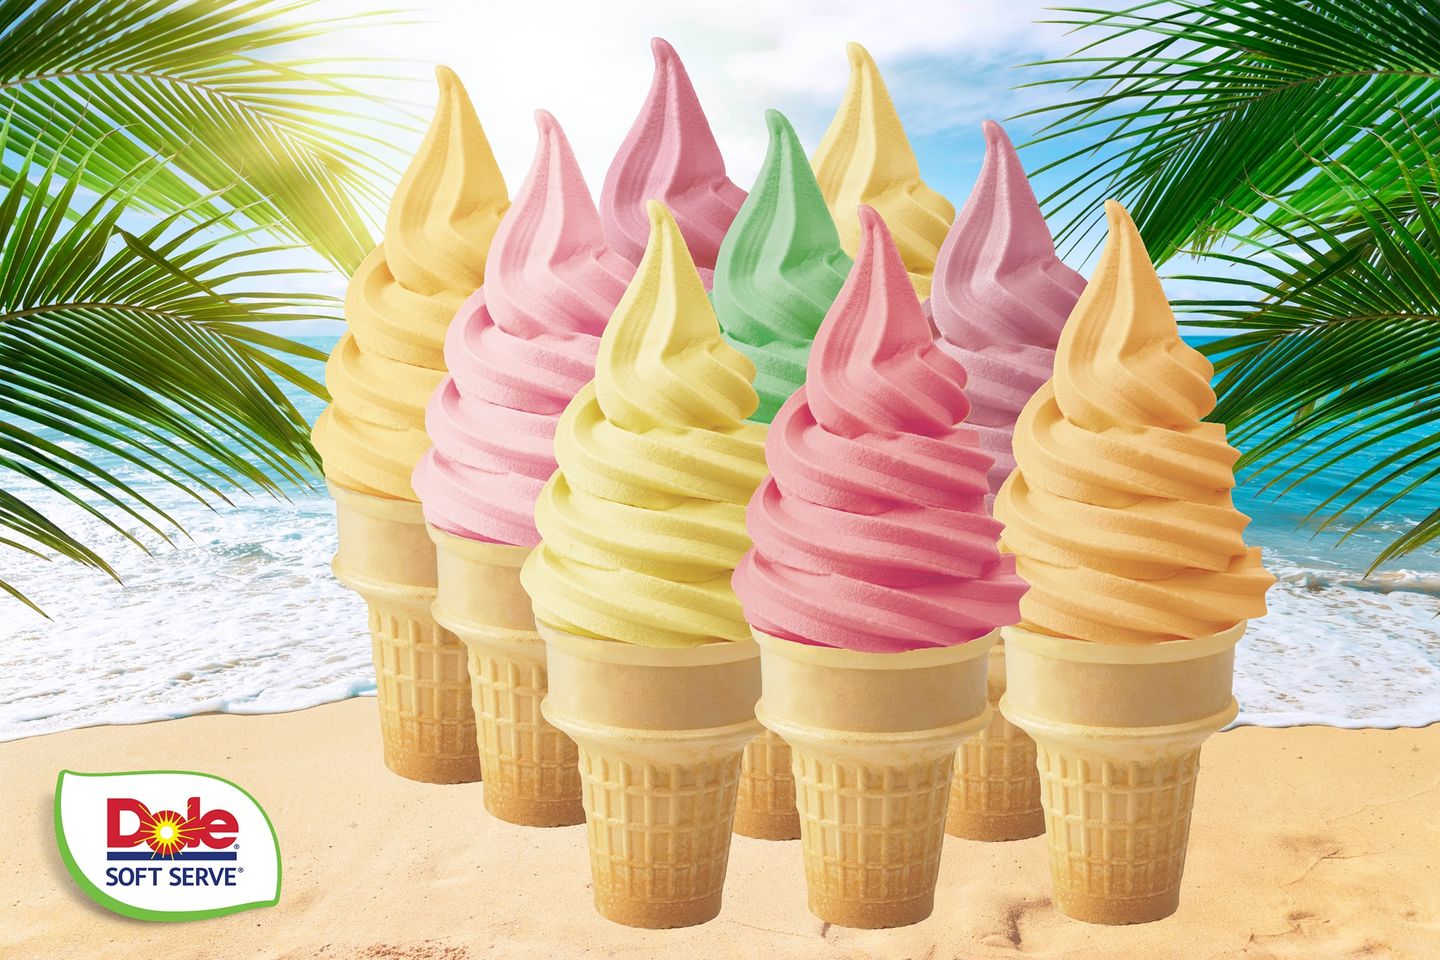 Dole Soft Serve Cones in Multiple Flavors